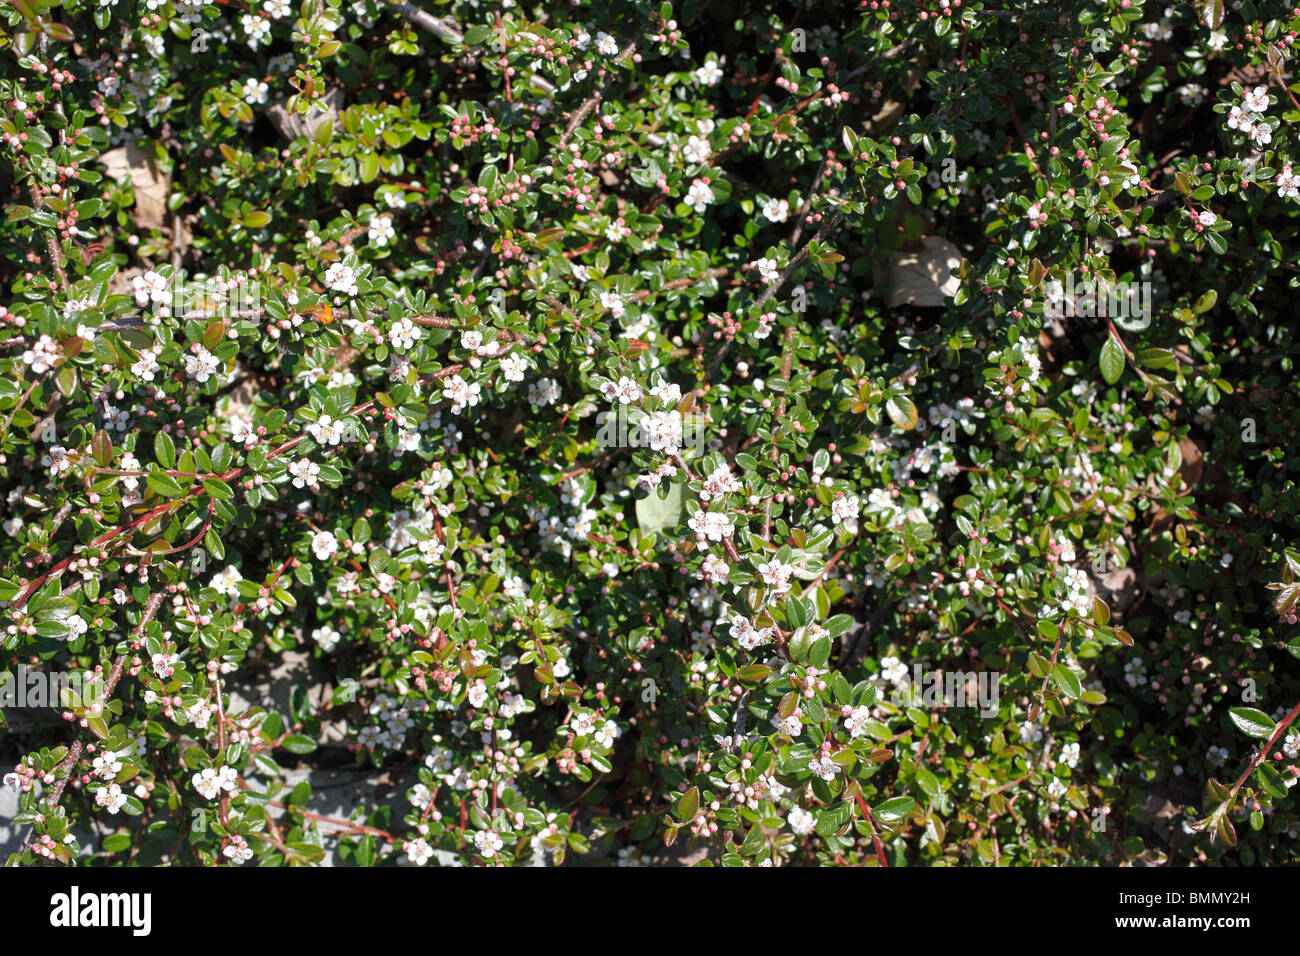 cotoneaster x sueclcus Coral Beauty shrub in flower Stock Photo